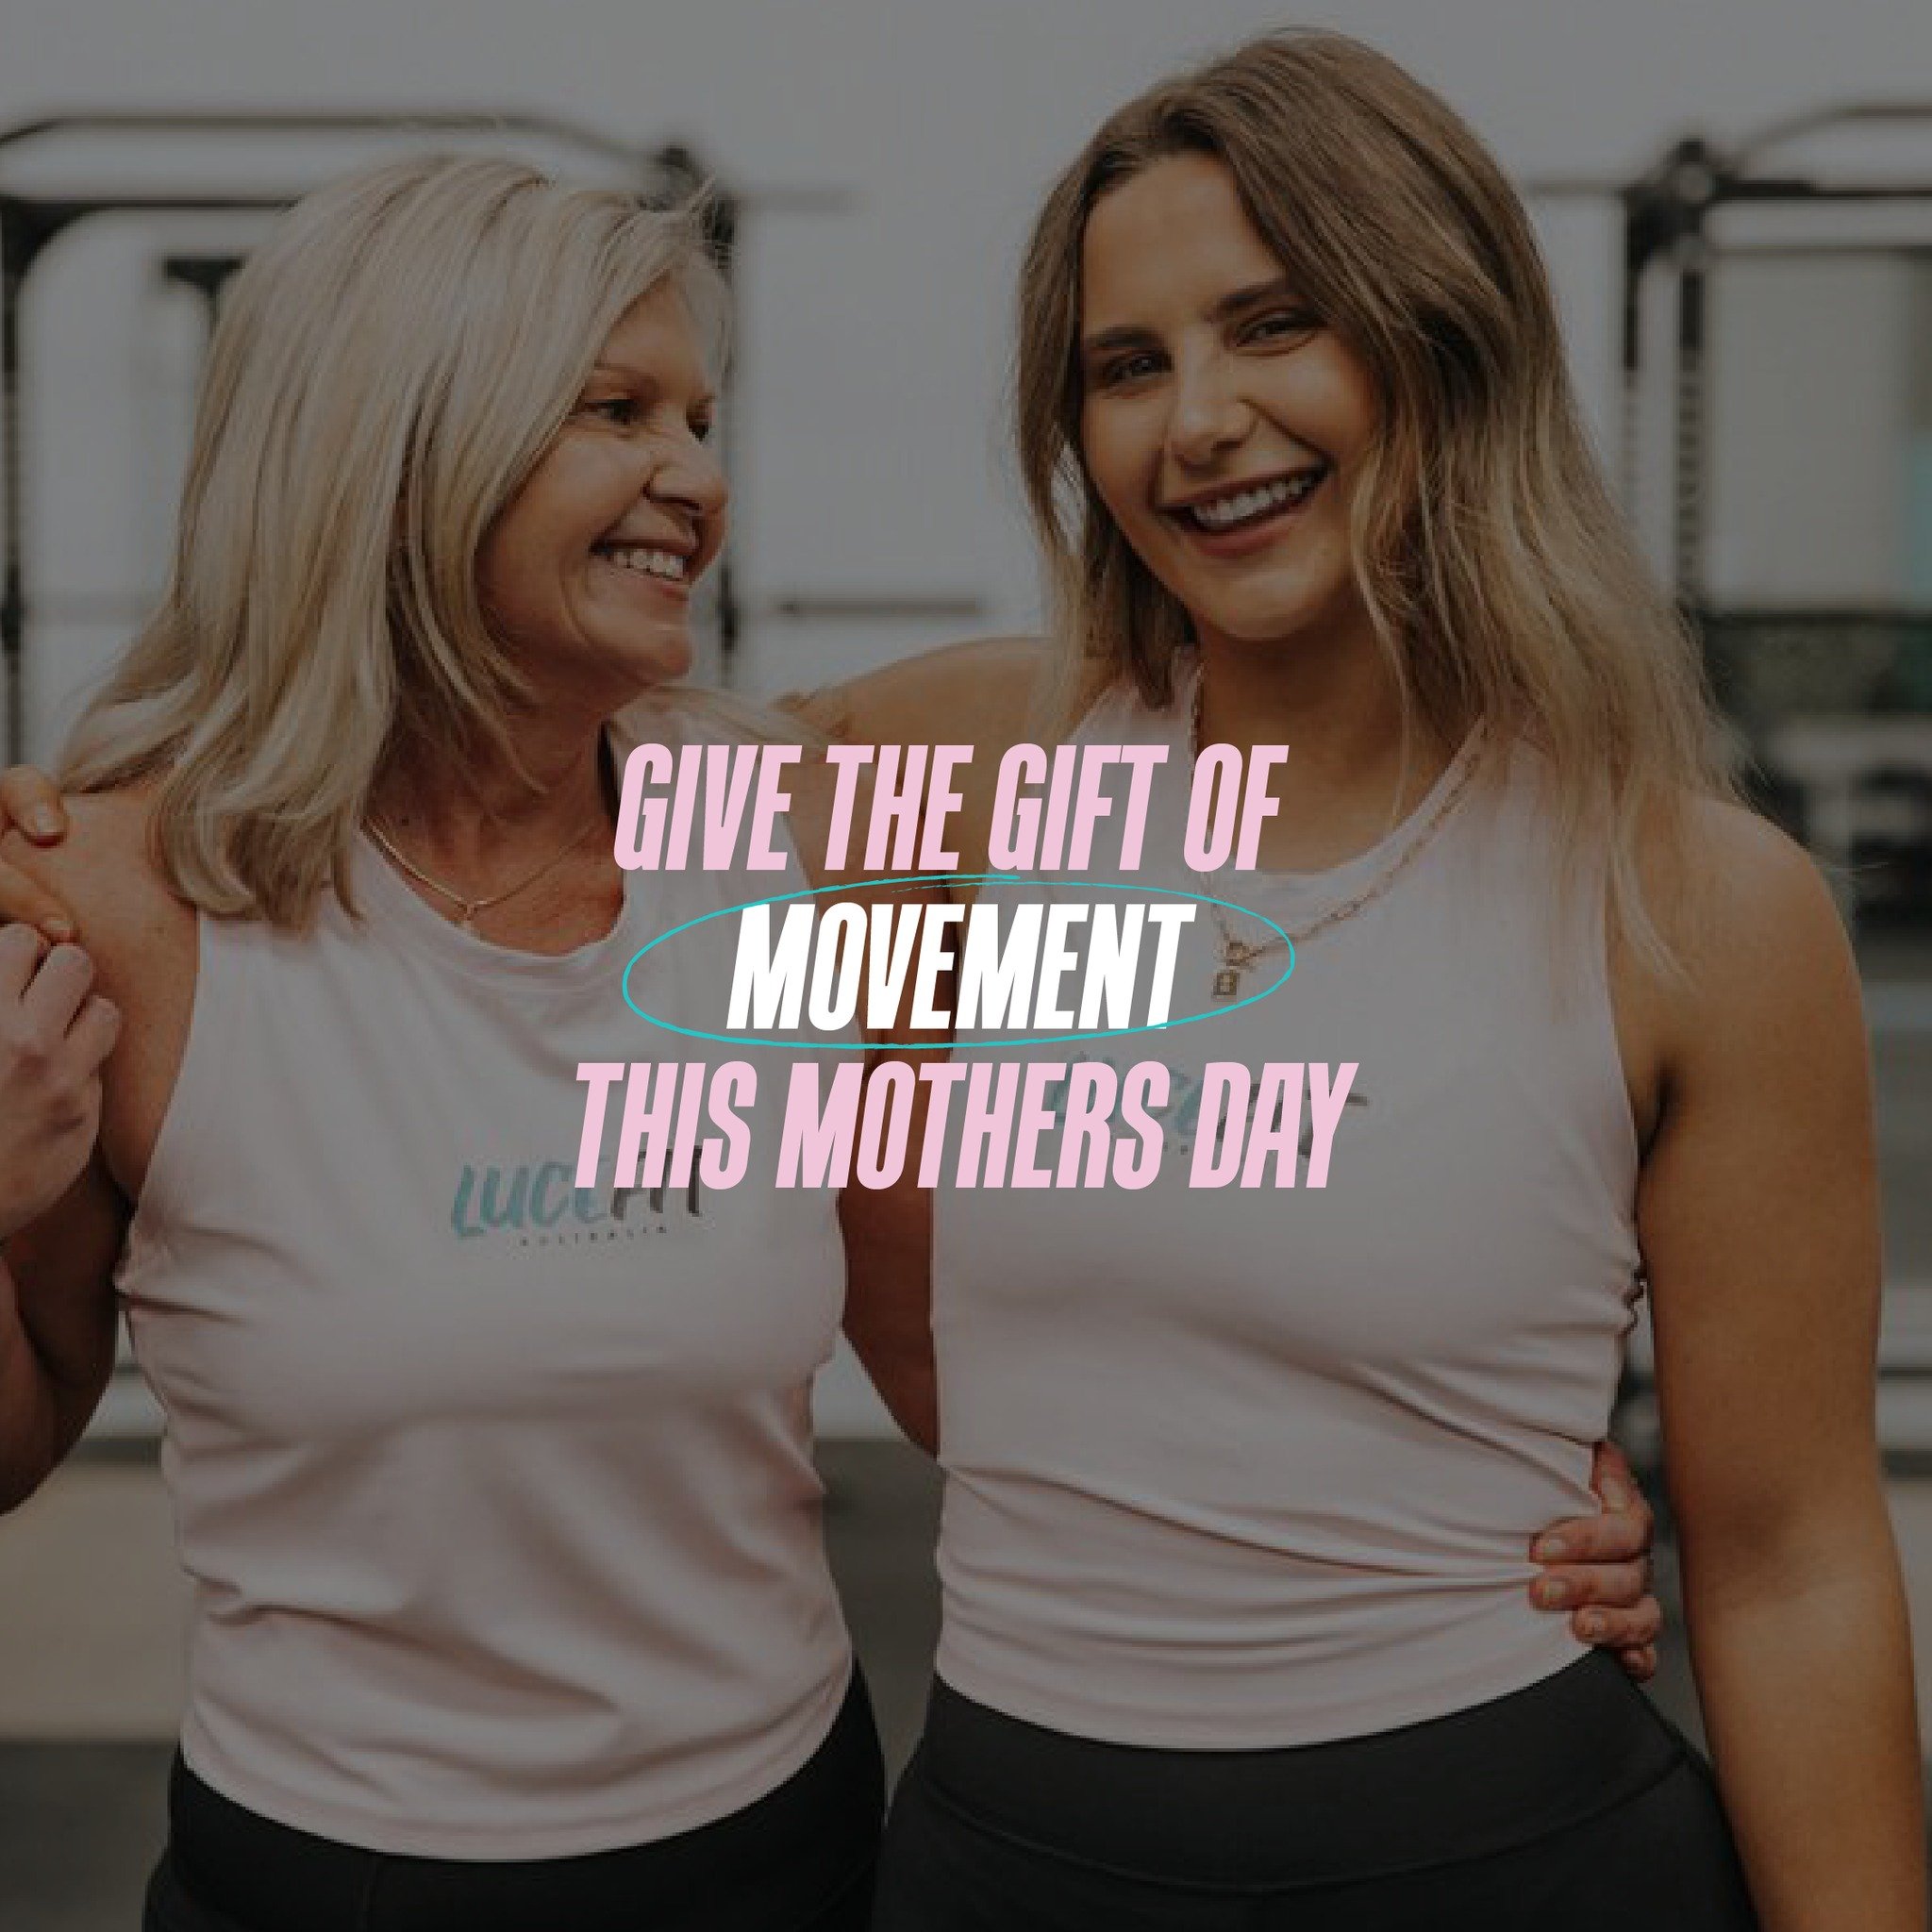 Give the gift of movement this Mothers Day 💝
Spoil your mum with a 1 month unlimited MOVERS 50+ Membership.

For a limited time only get 50% OFF! ⏰
Pay only $70 for a membership valued at $140, it's a win-win!

GET THE DEAL
Simply fill in the Gift V